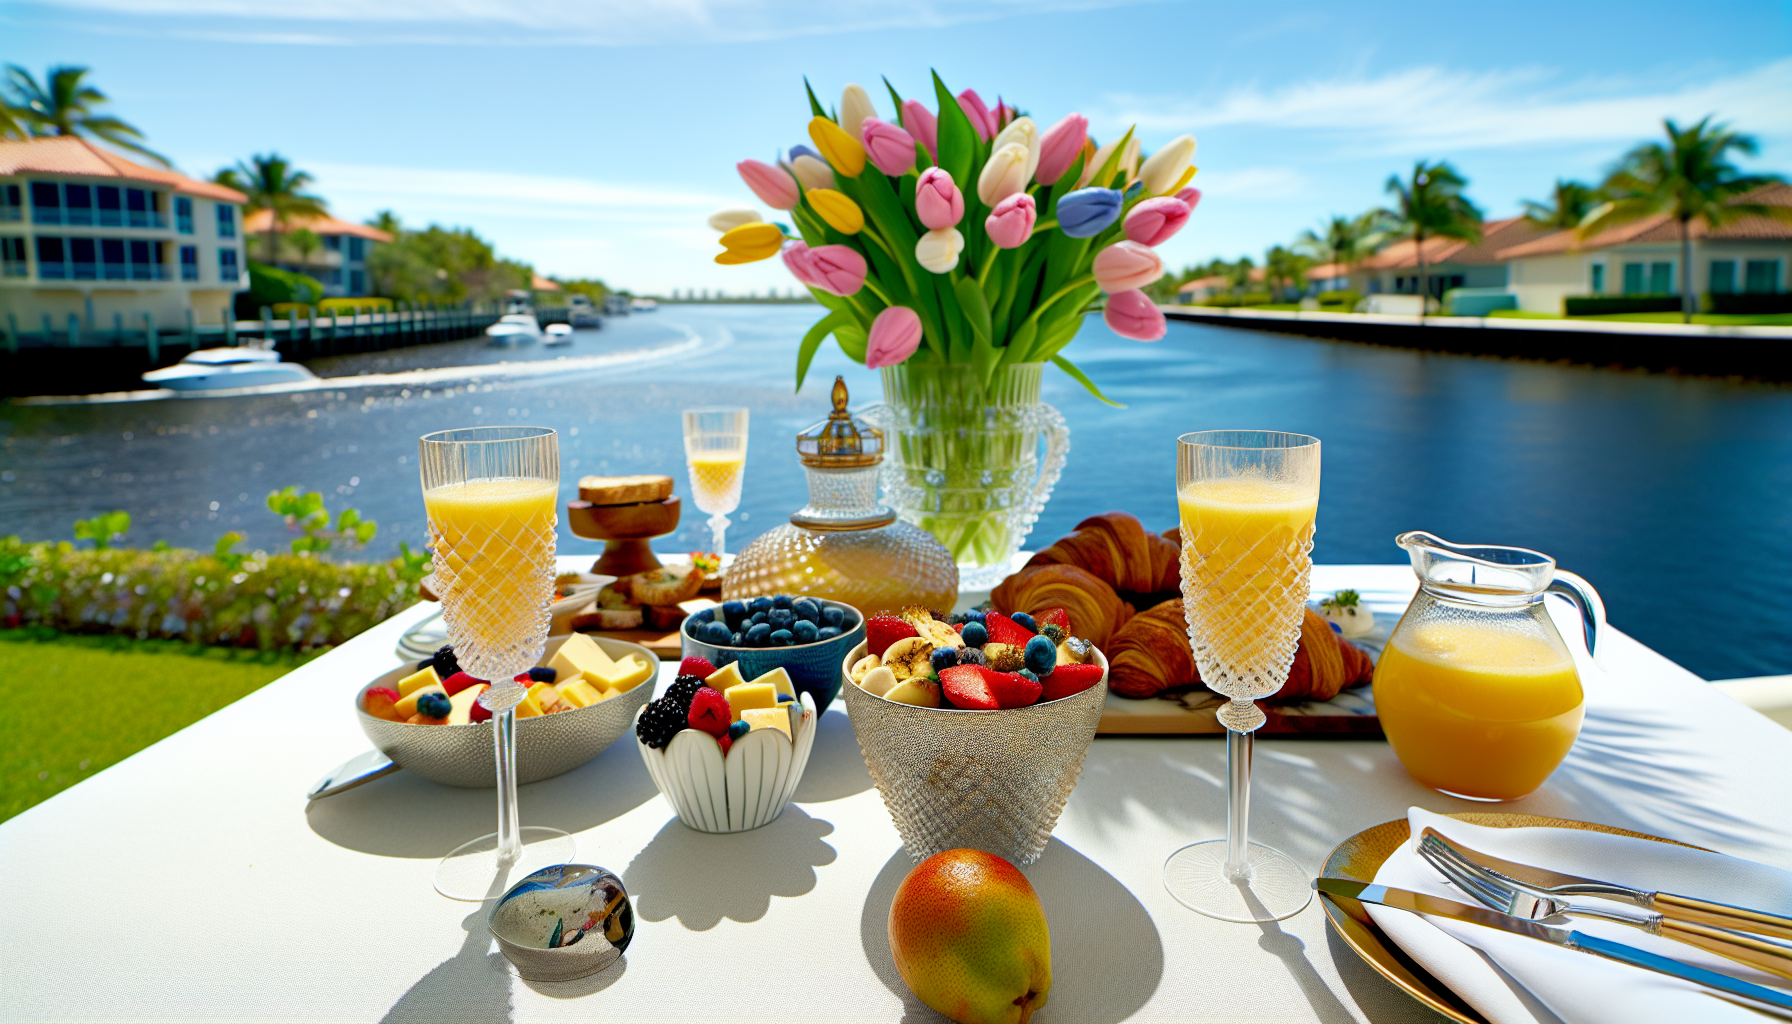 A table set for weekend brunch with a view of the Intracoastal Waterway